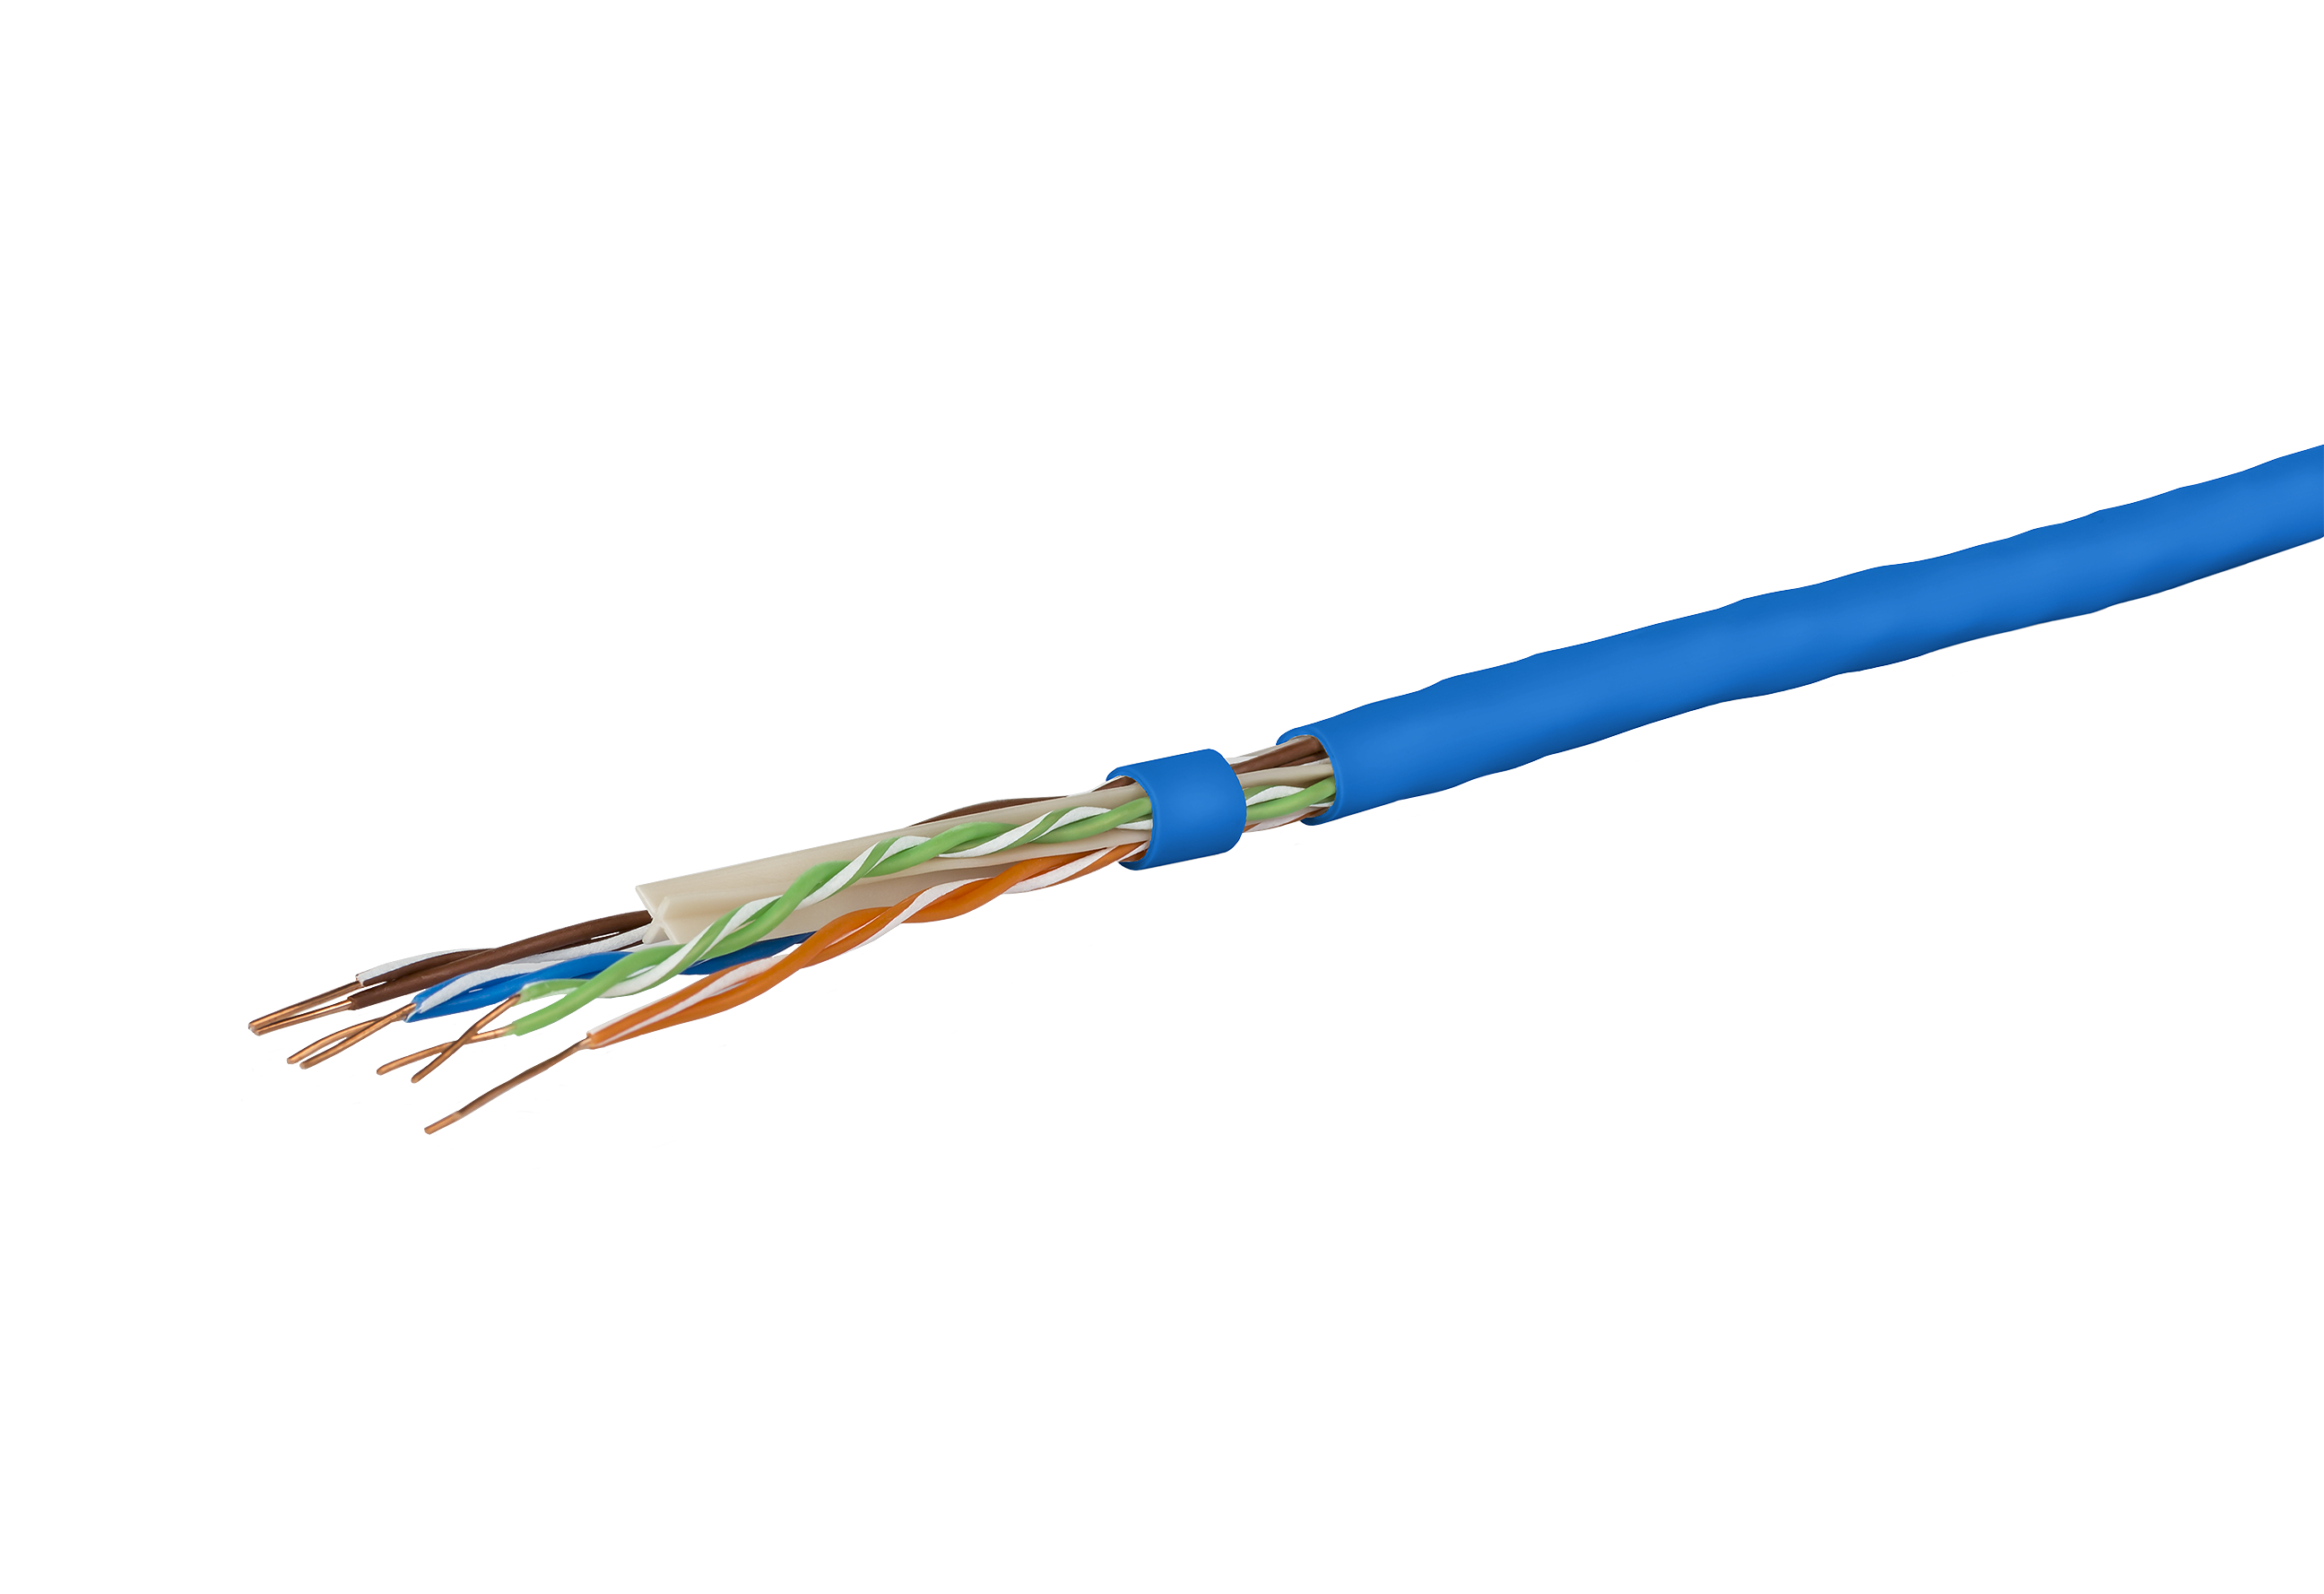 electricity clipart ethernet cable